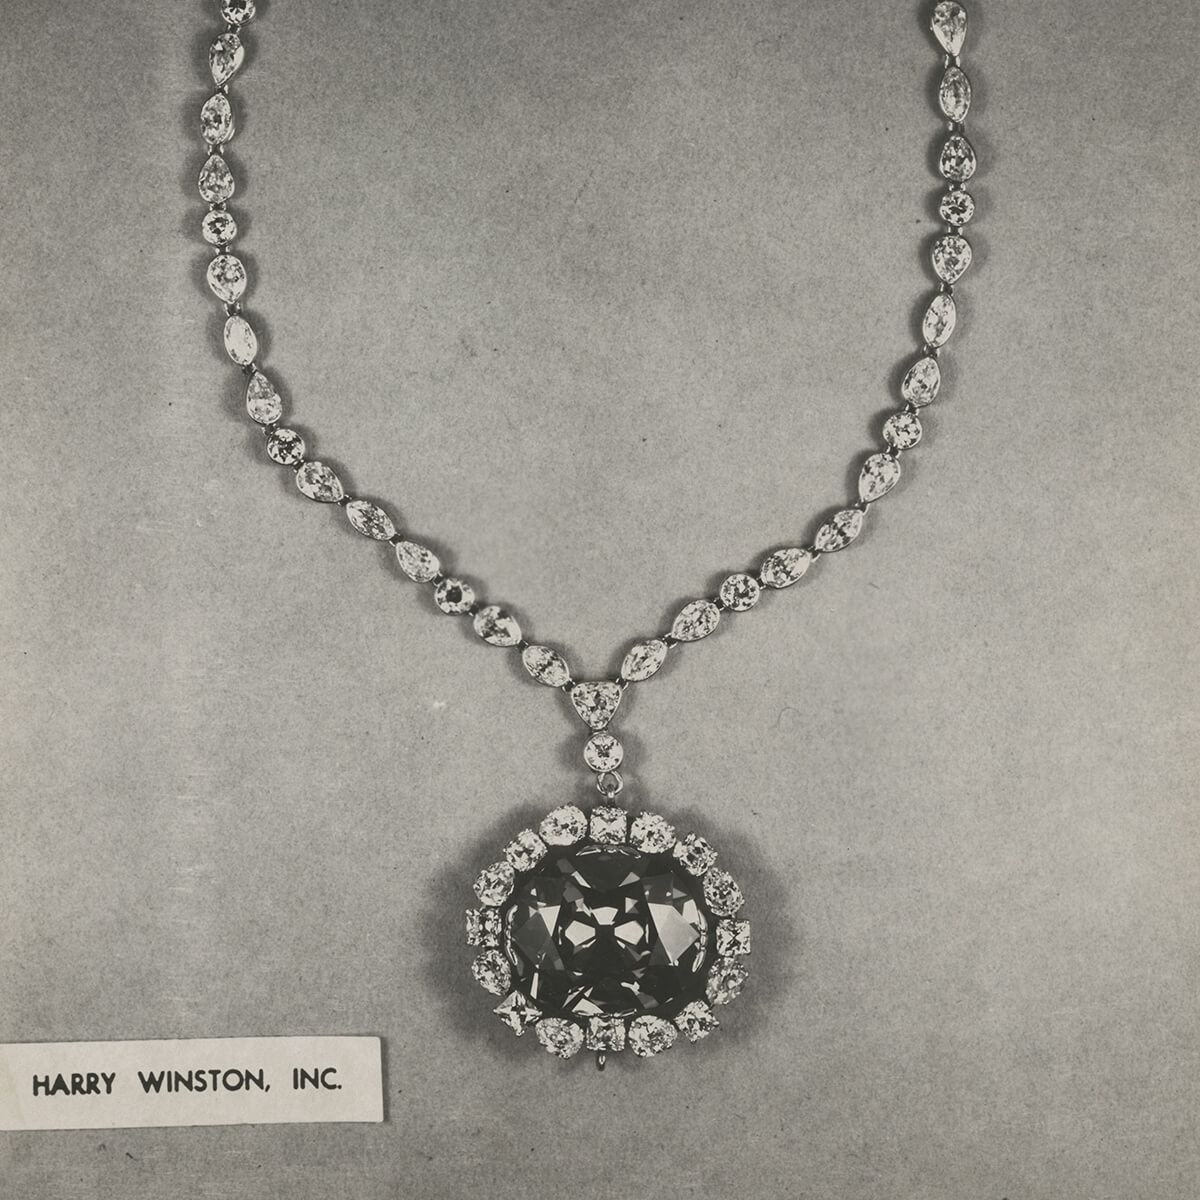 A black and white image of the original necklace setting for The Hope Diamond